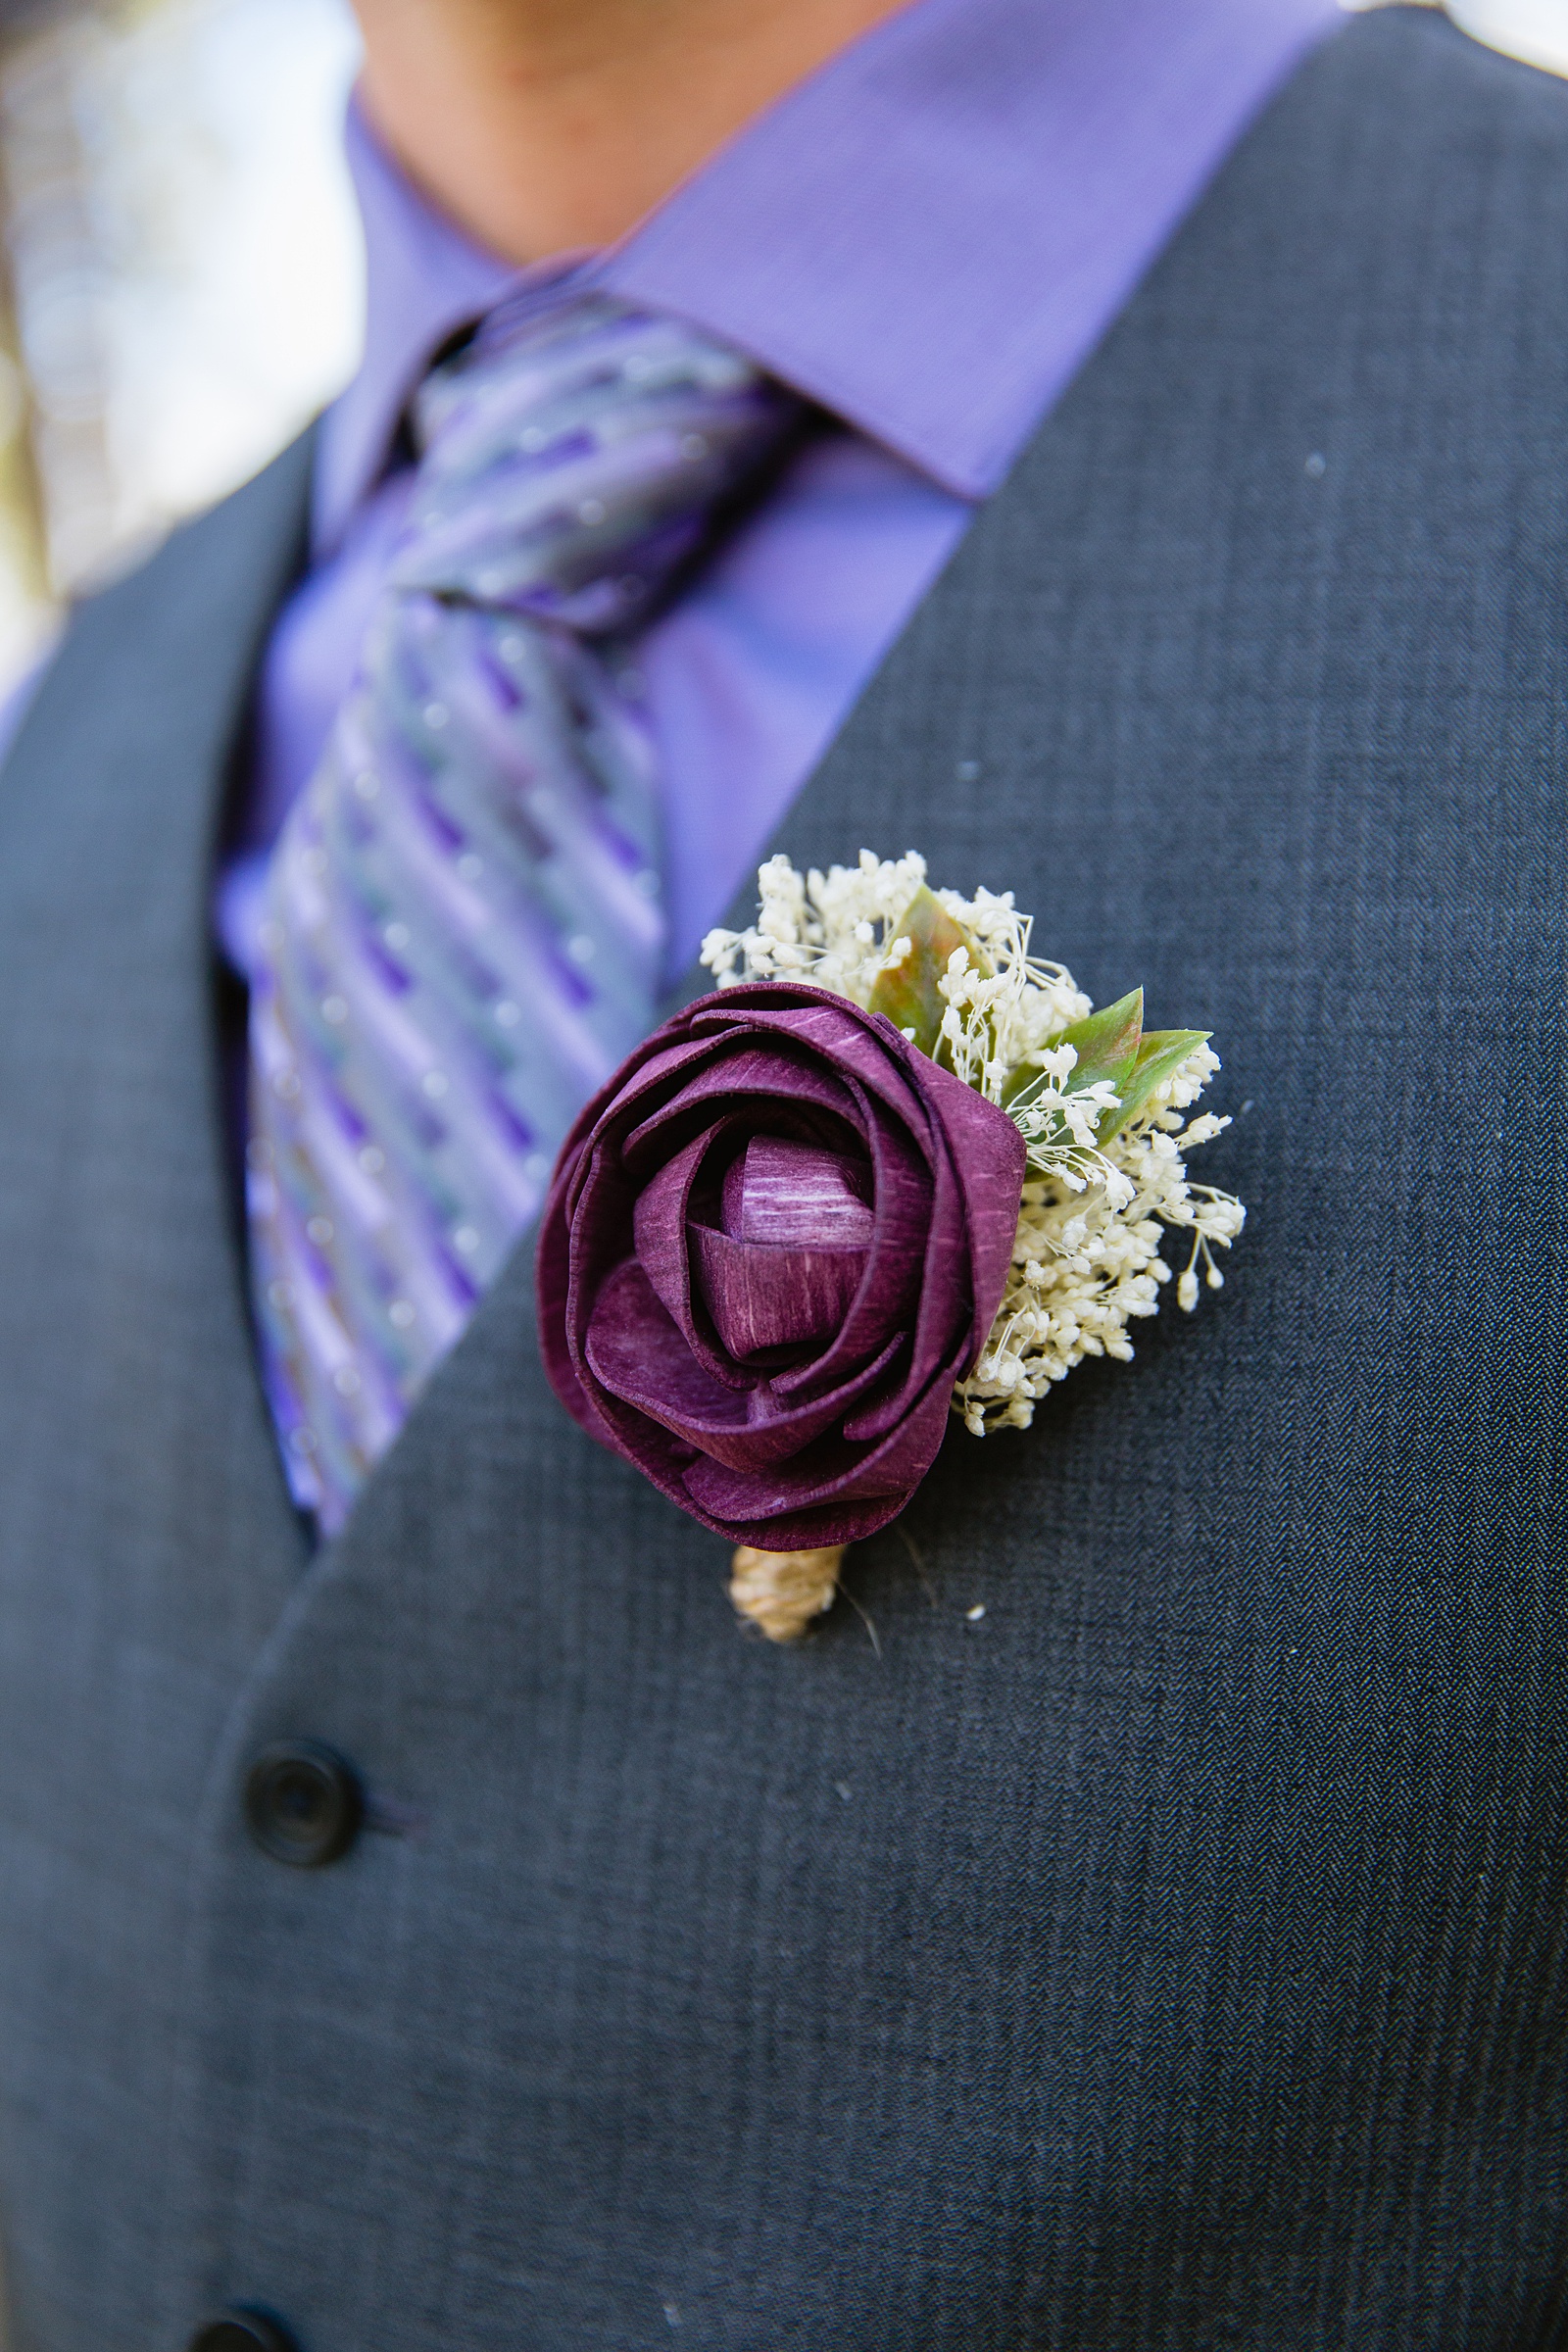 Groom's purple wooden flower boutonniere by PMA Photography.